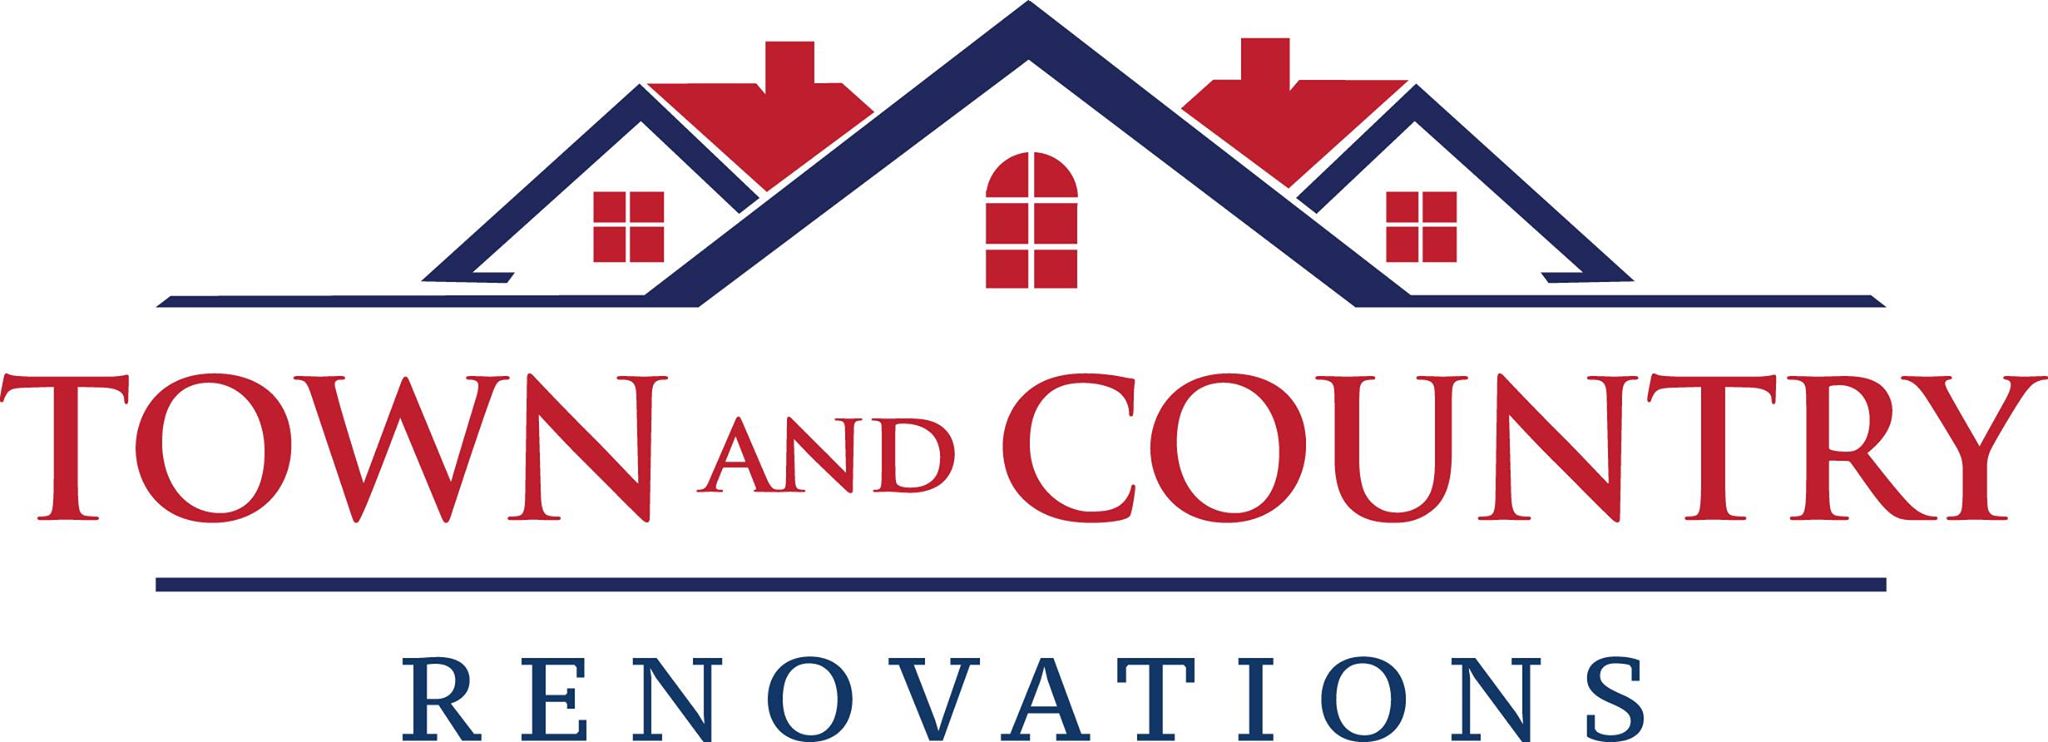 Town and Country Renovations, LLC Logo